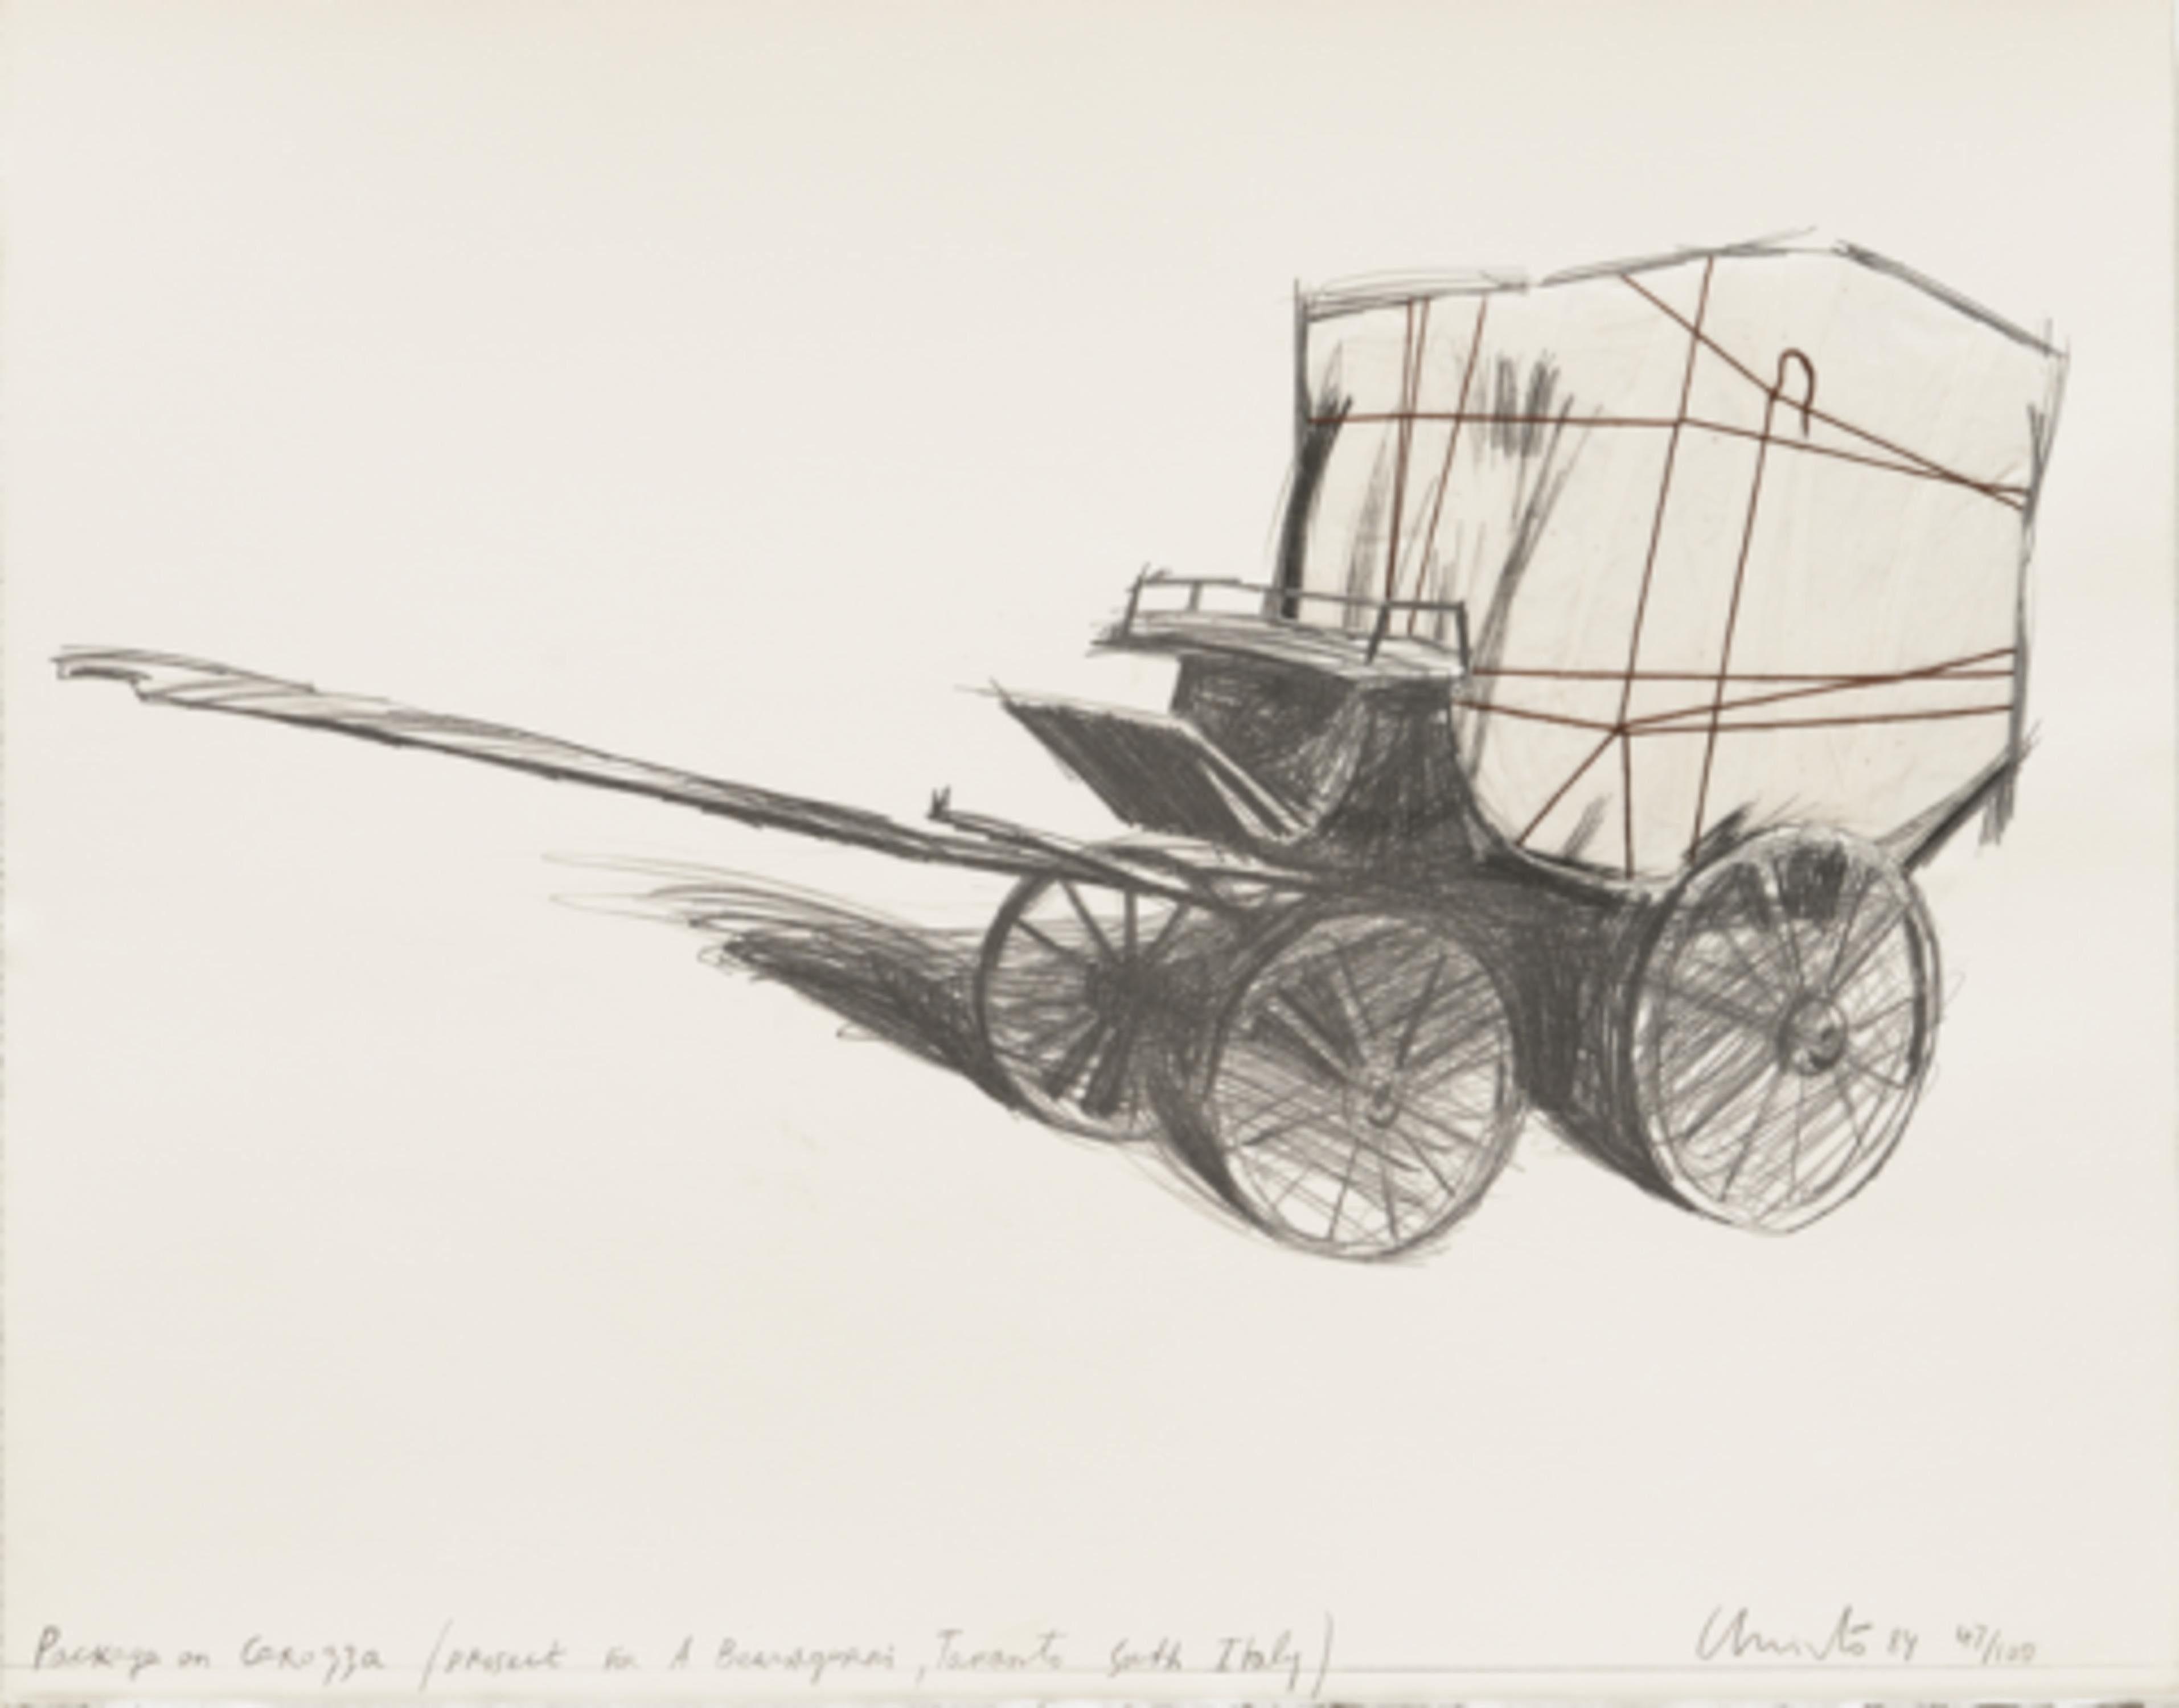 Package on Carrozza - Print by Javacheff Christo